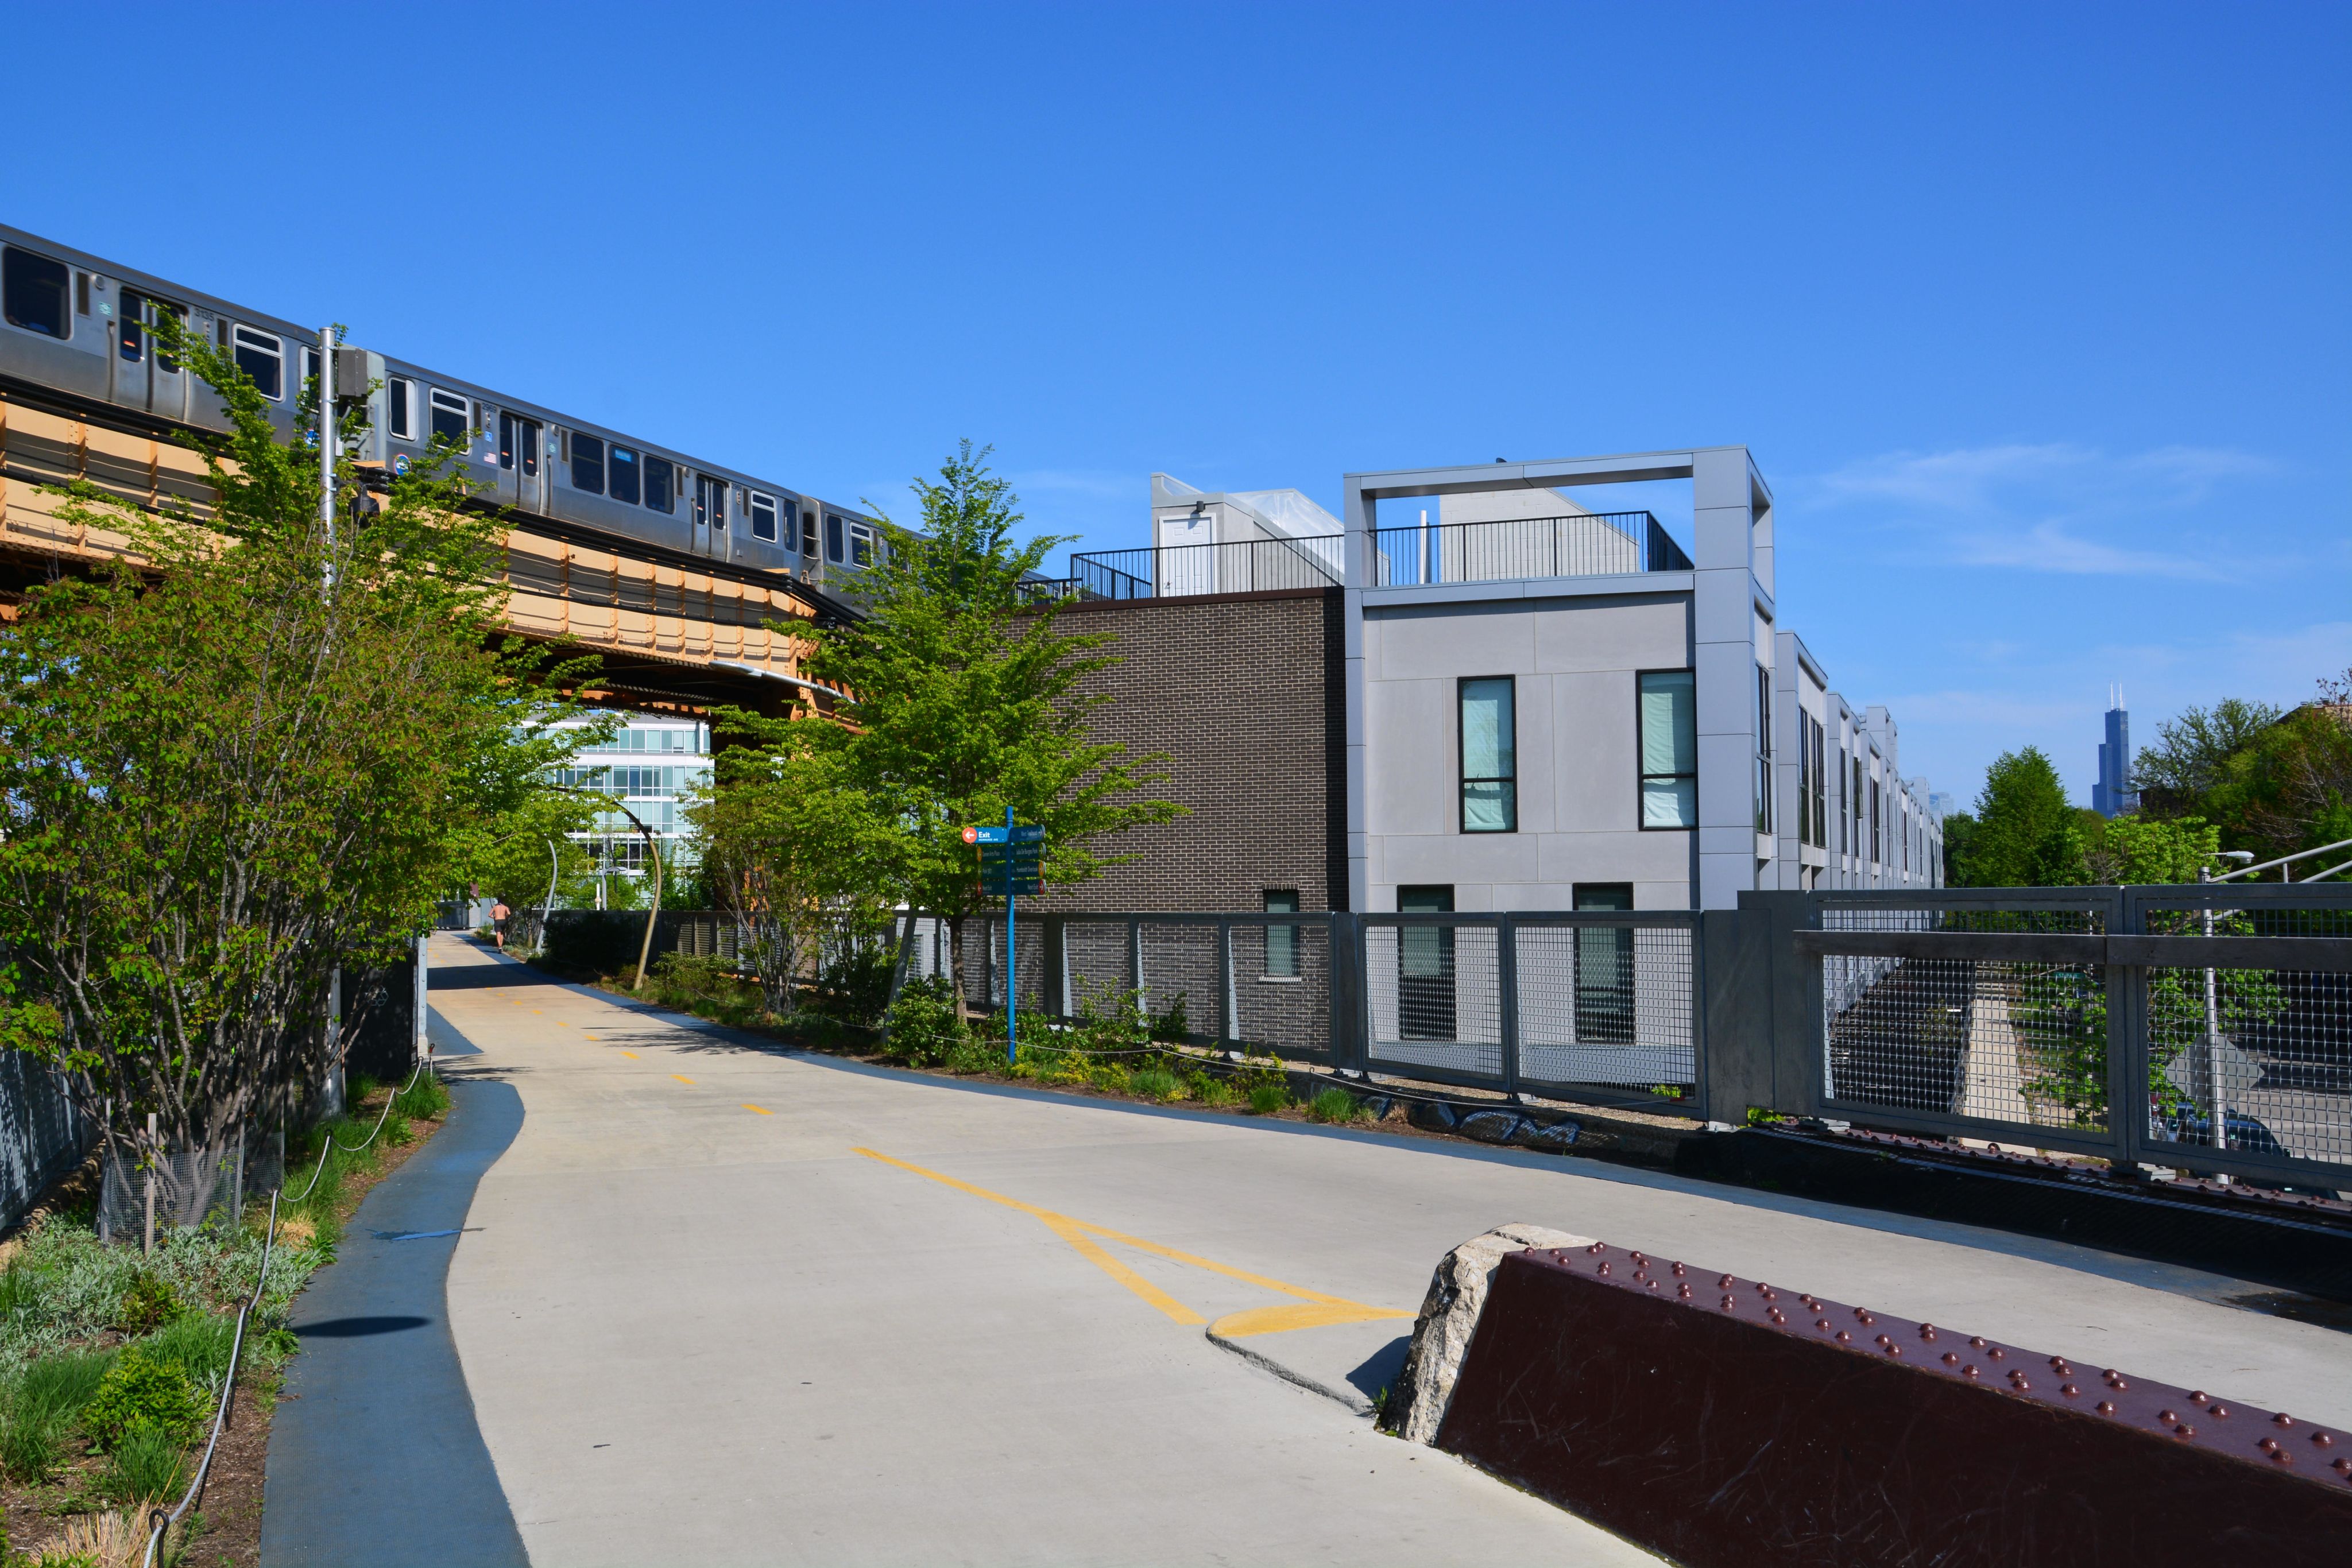 A luxury condominimum building with dark grey brick and light grey window framings is the focus of this image. The building is mere feet from the 606 trail, which is in the foreground of the image. A blue line train runs over the trail on a blue sky day. 